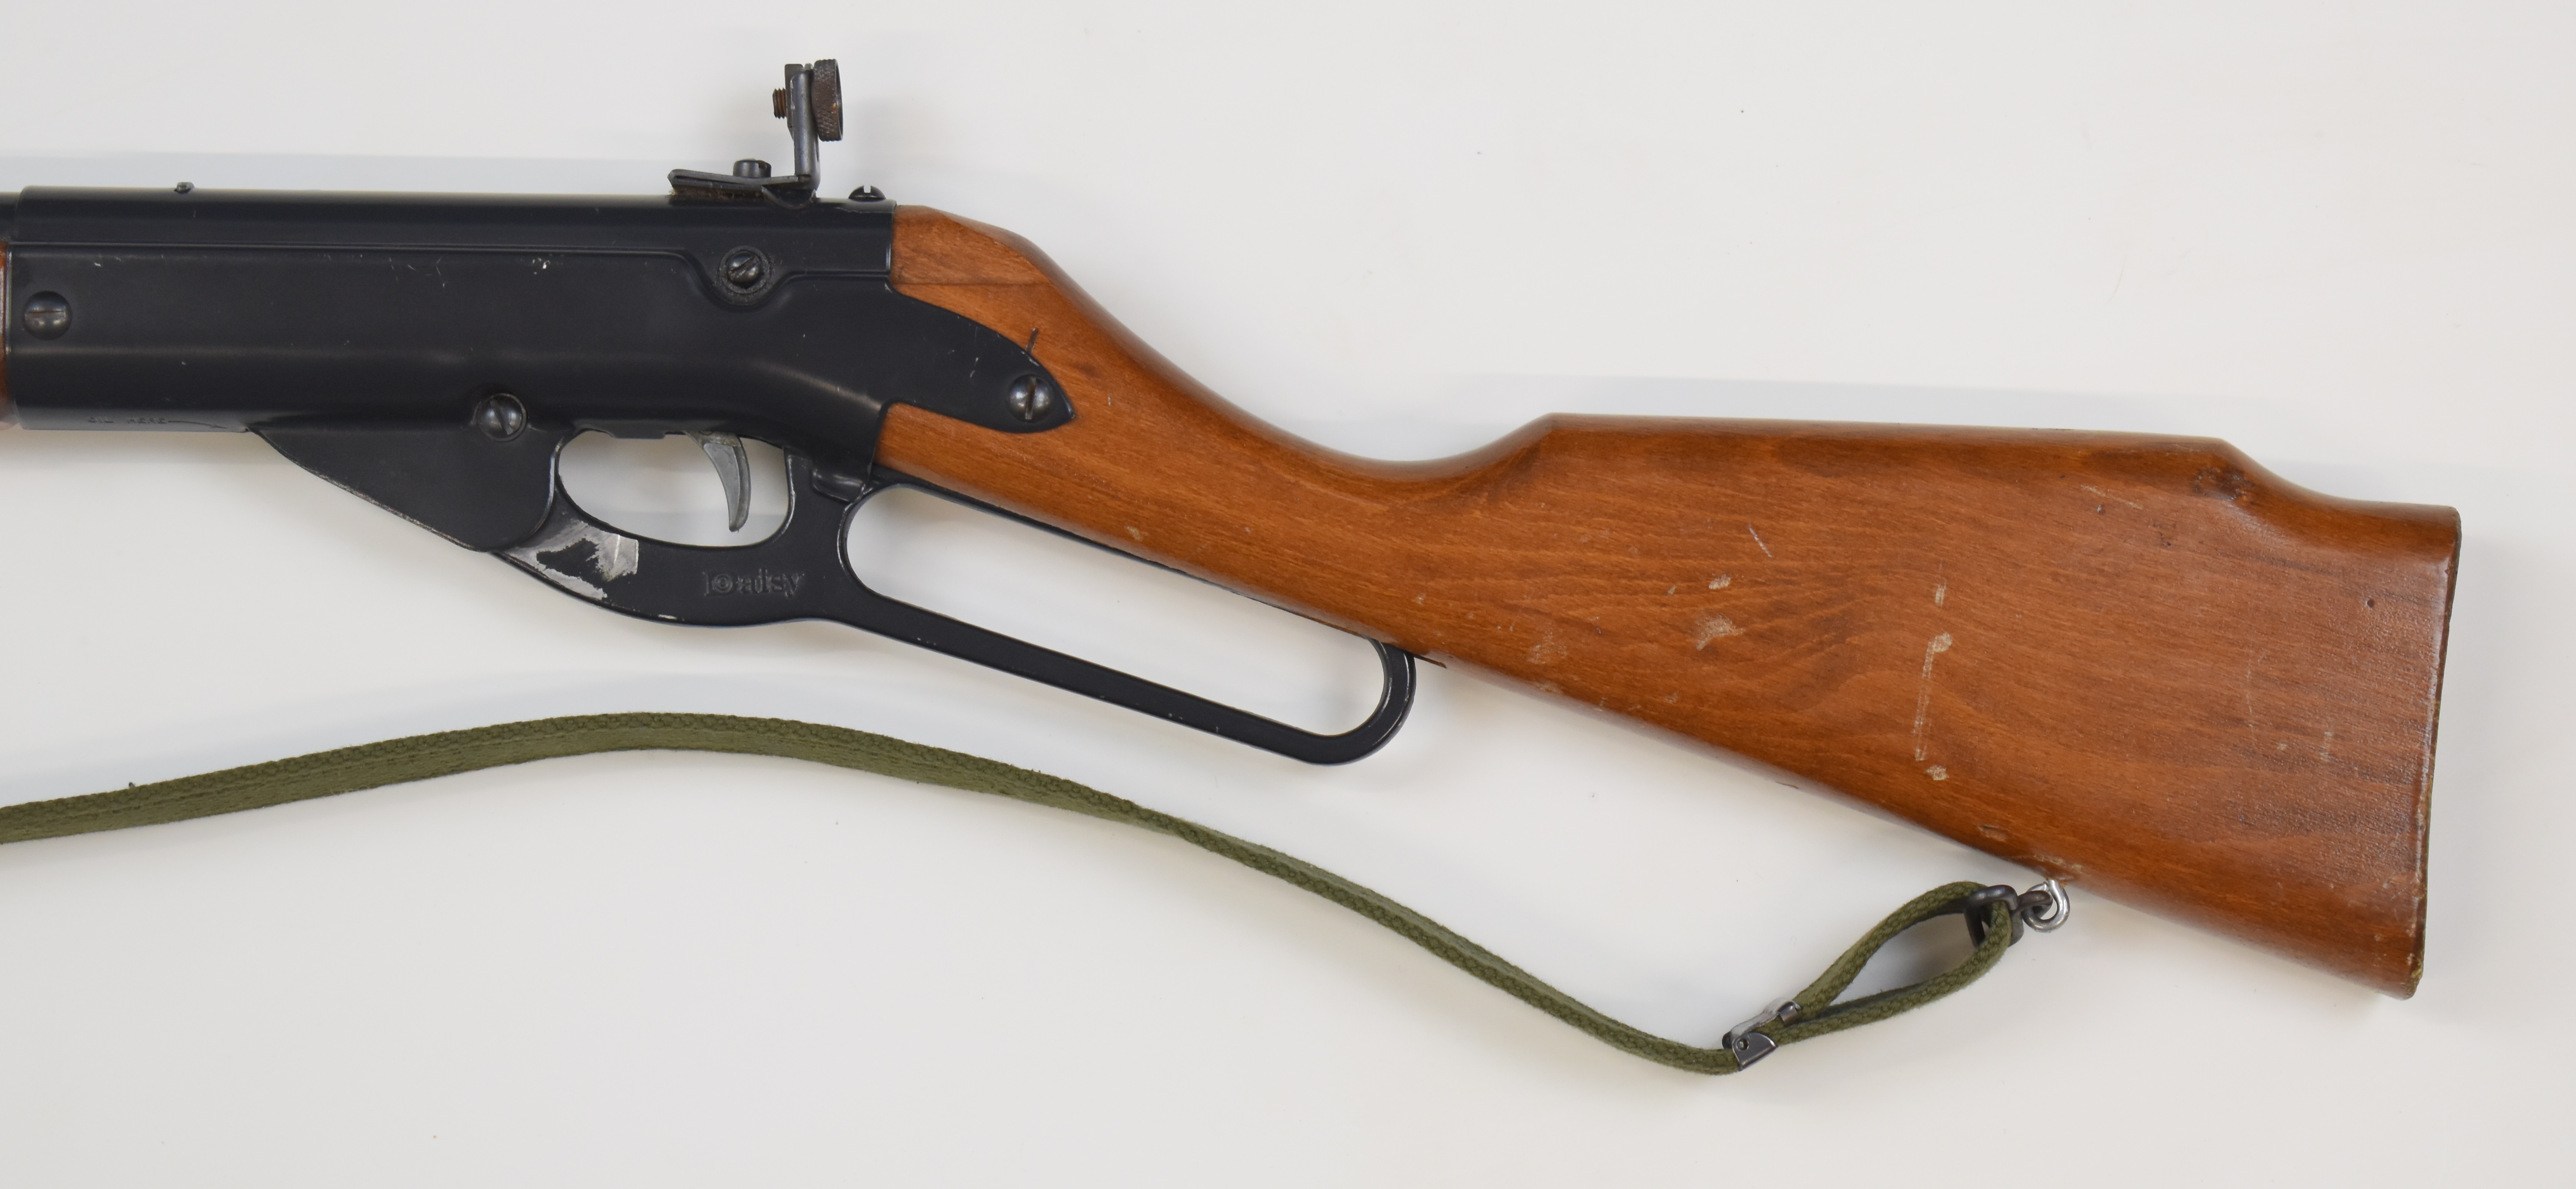 Daisy Model 99 Winchester style underlever-action air rifle with wooden grip and forend, canvas - Image 8 of 10